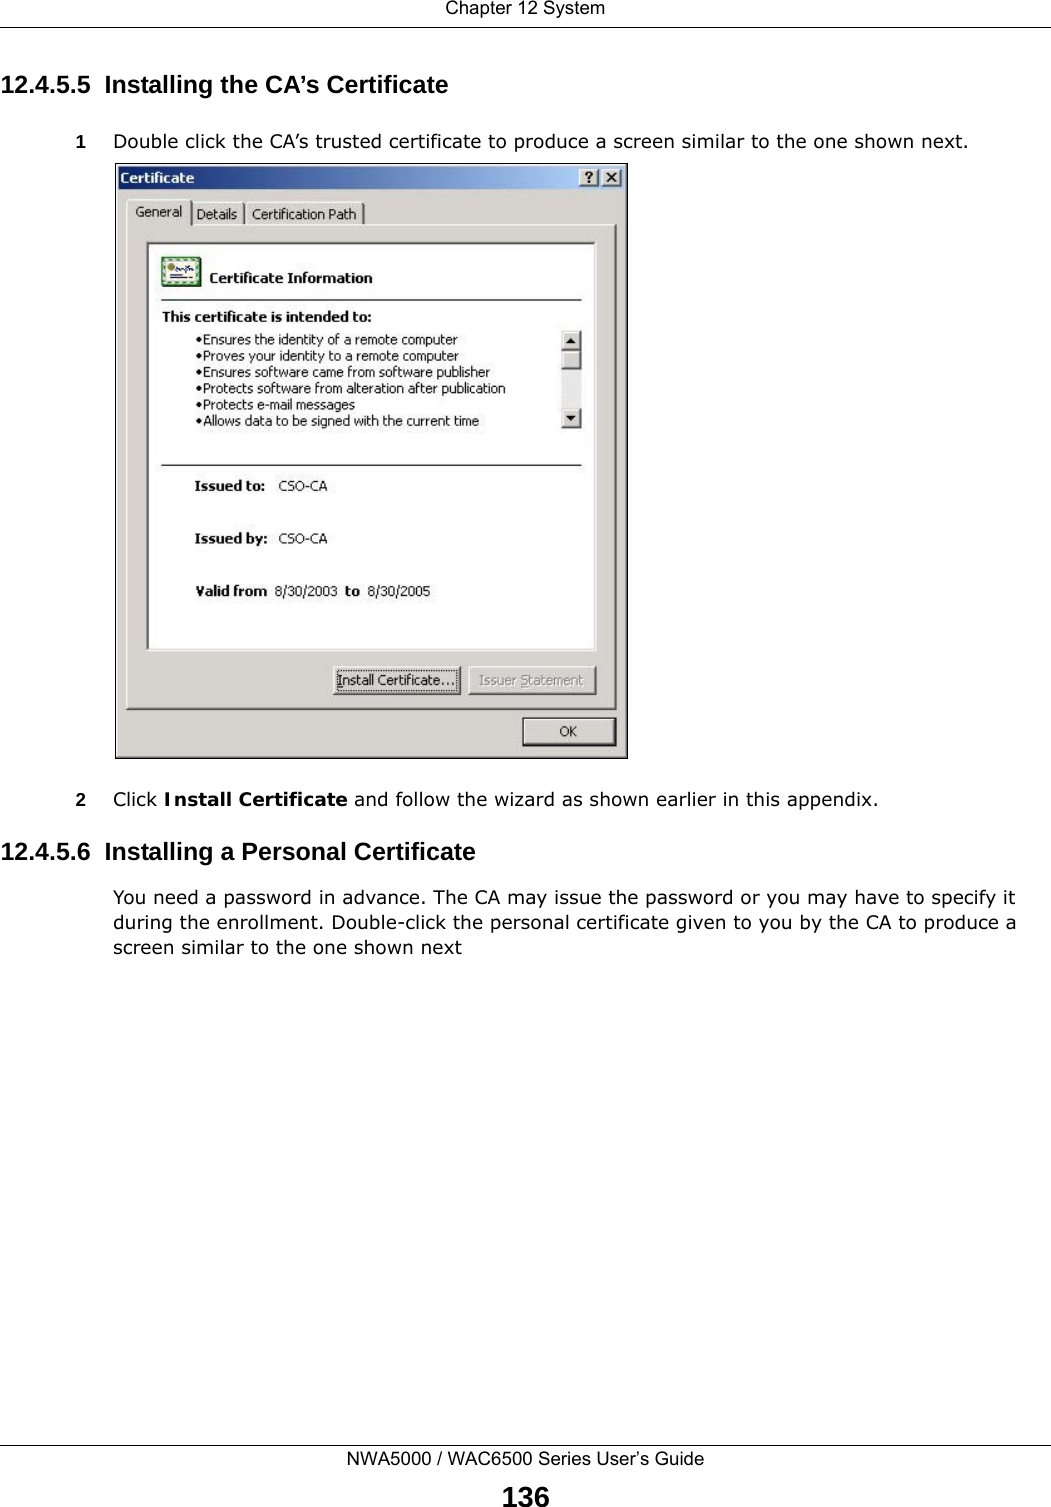 Chapter 12 SystemNWA5000 / WAC6500 Series User’s Guide13612.4.5.5  Installing the CA’s Certificate1Double click the CA’s trusted certificate to produce a screen similar to the one shown next.2Click Install Certificate and follow the wizard as shown earlier in this appendix.12.4.5.6  Installing a Personal CertificateYou need a password in advance. The CA may issue the password or you may have to specify it during the enrollment. Double-click the personal certificate given to you by the CA to produce a screen similar to the one shown next